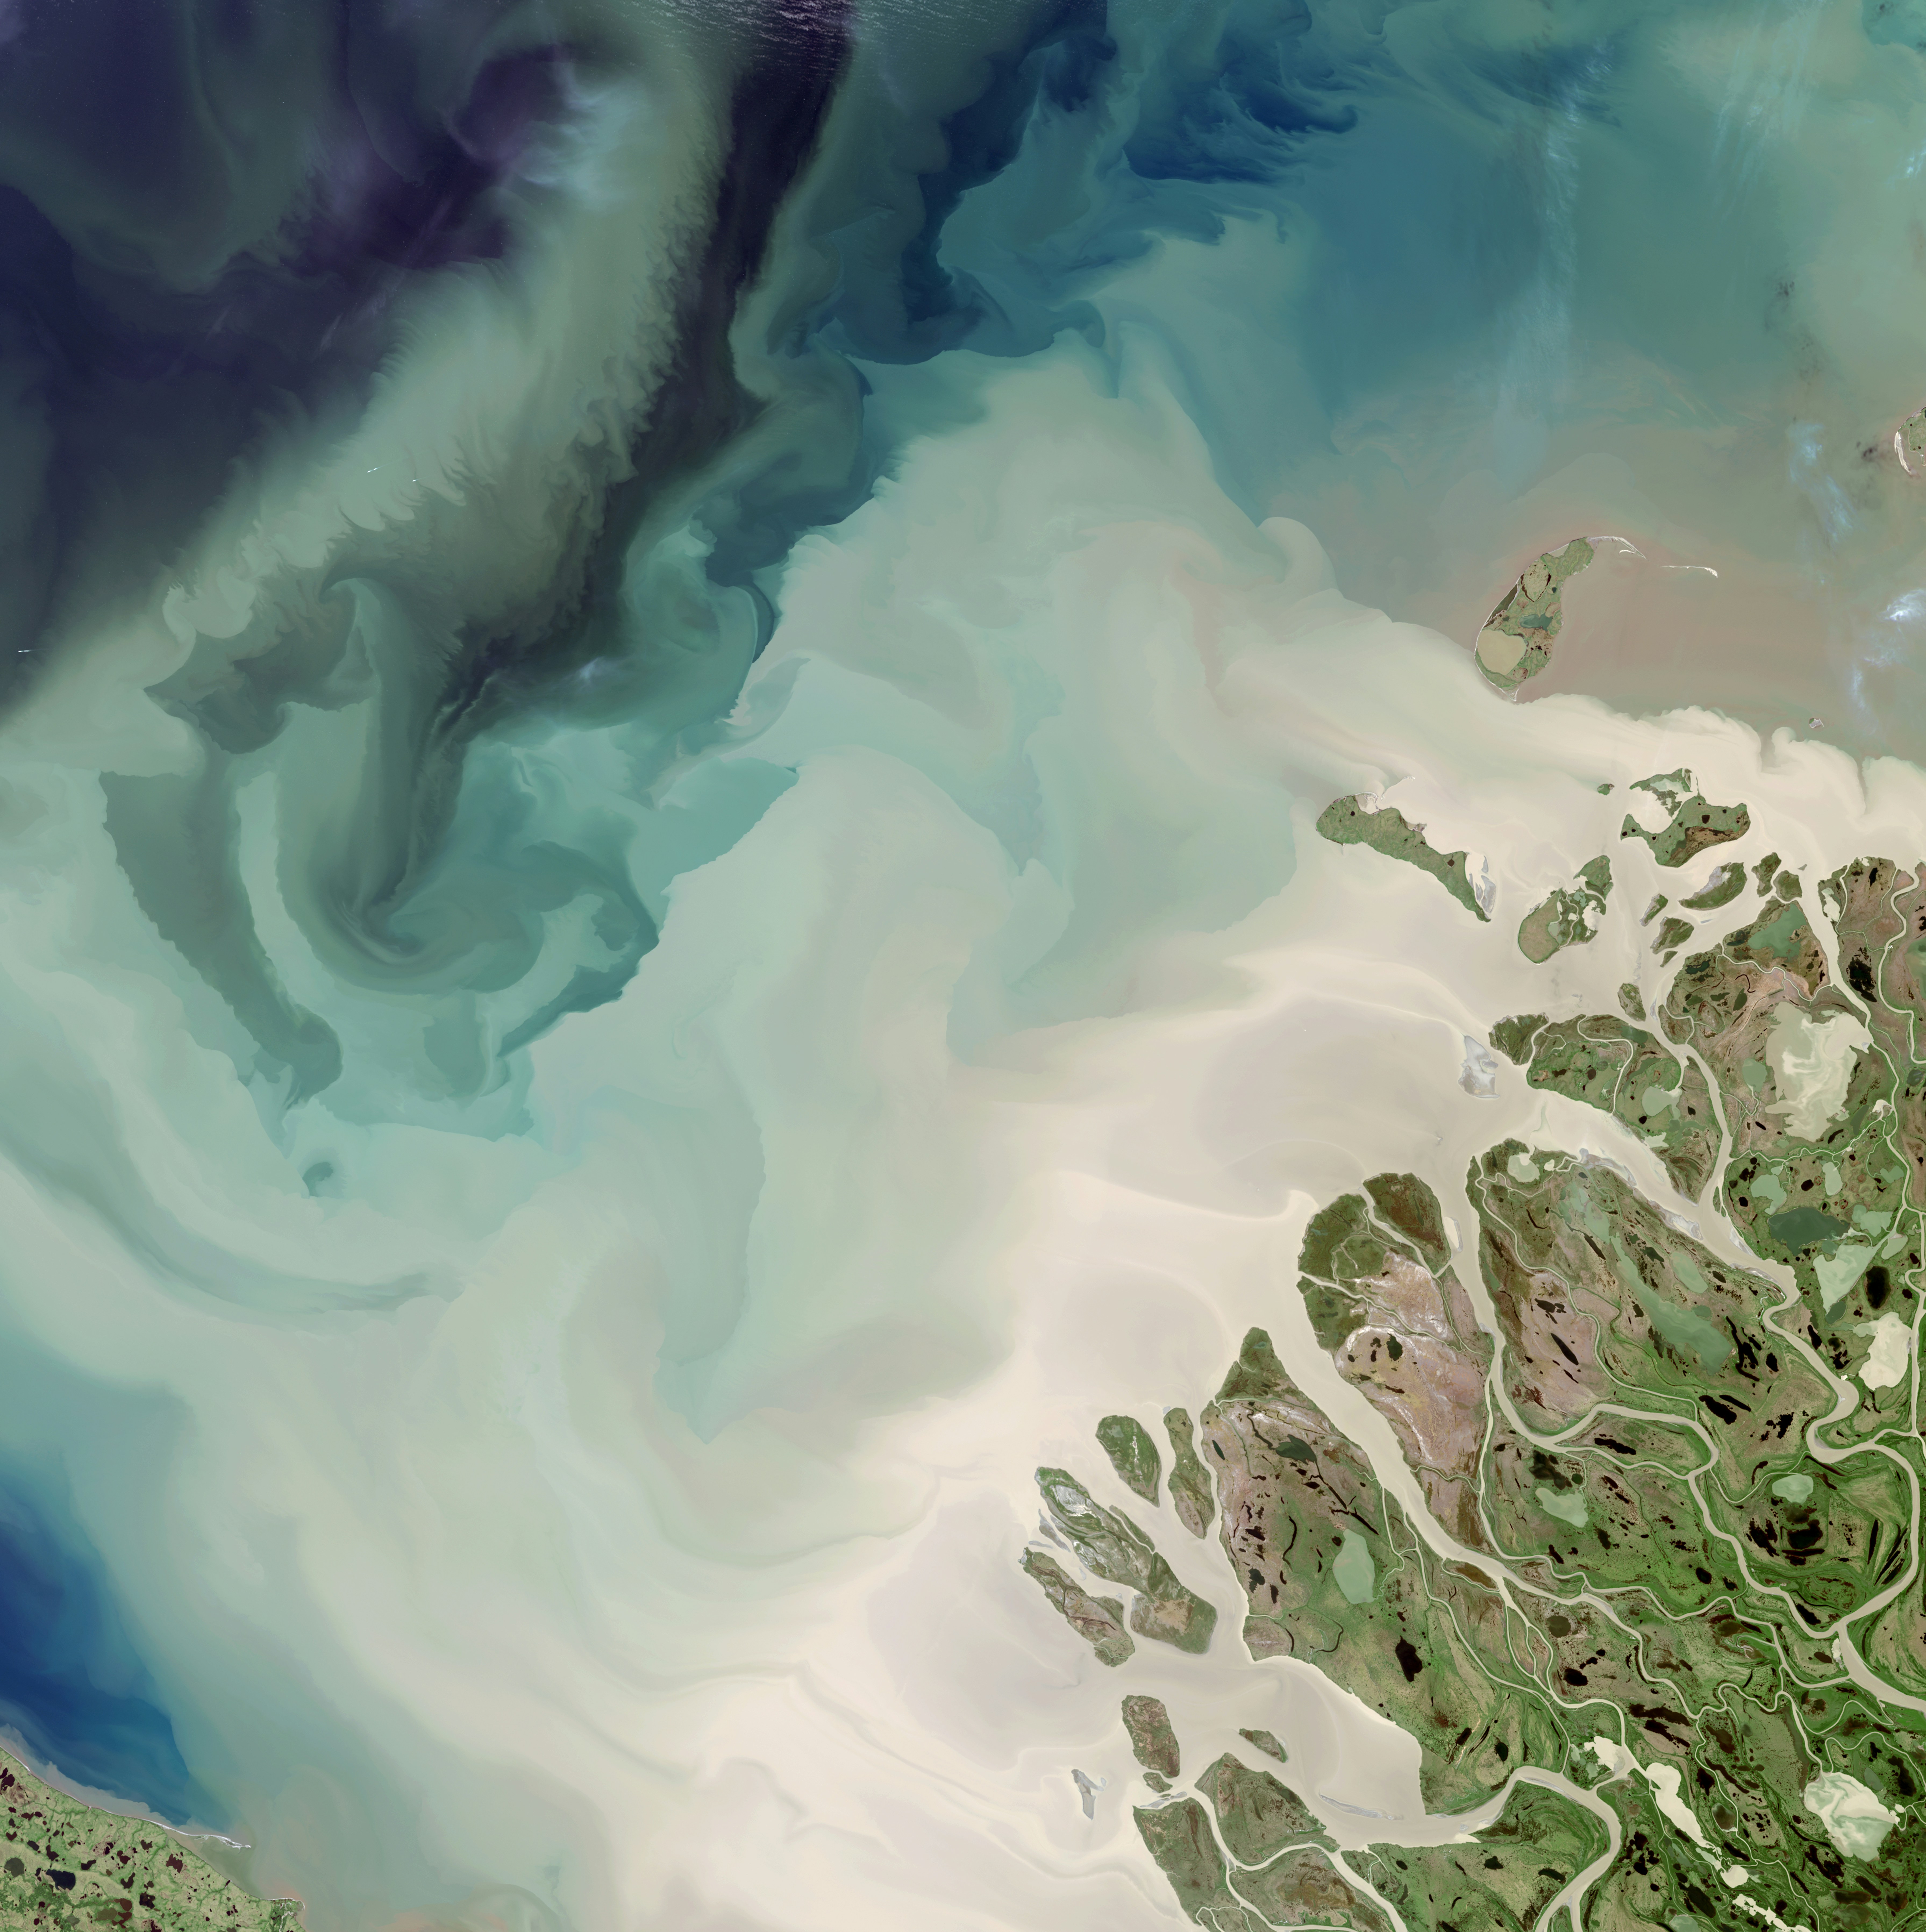 In far northern Canada, pulses of freshwater flow down rivers after inland ice and snow melts. These pulses, known as a freshet, carry huge amounts of sediment. The sediment seen in this image flowed into the Beaufort Sea from the Mackenzie River, the longest northward-flowing river in North America.